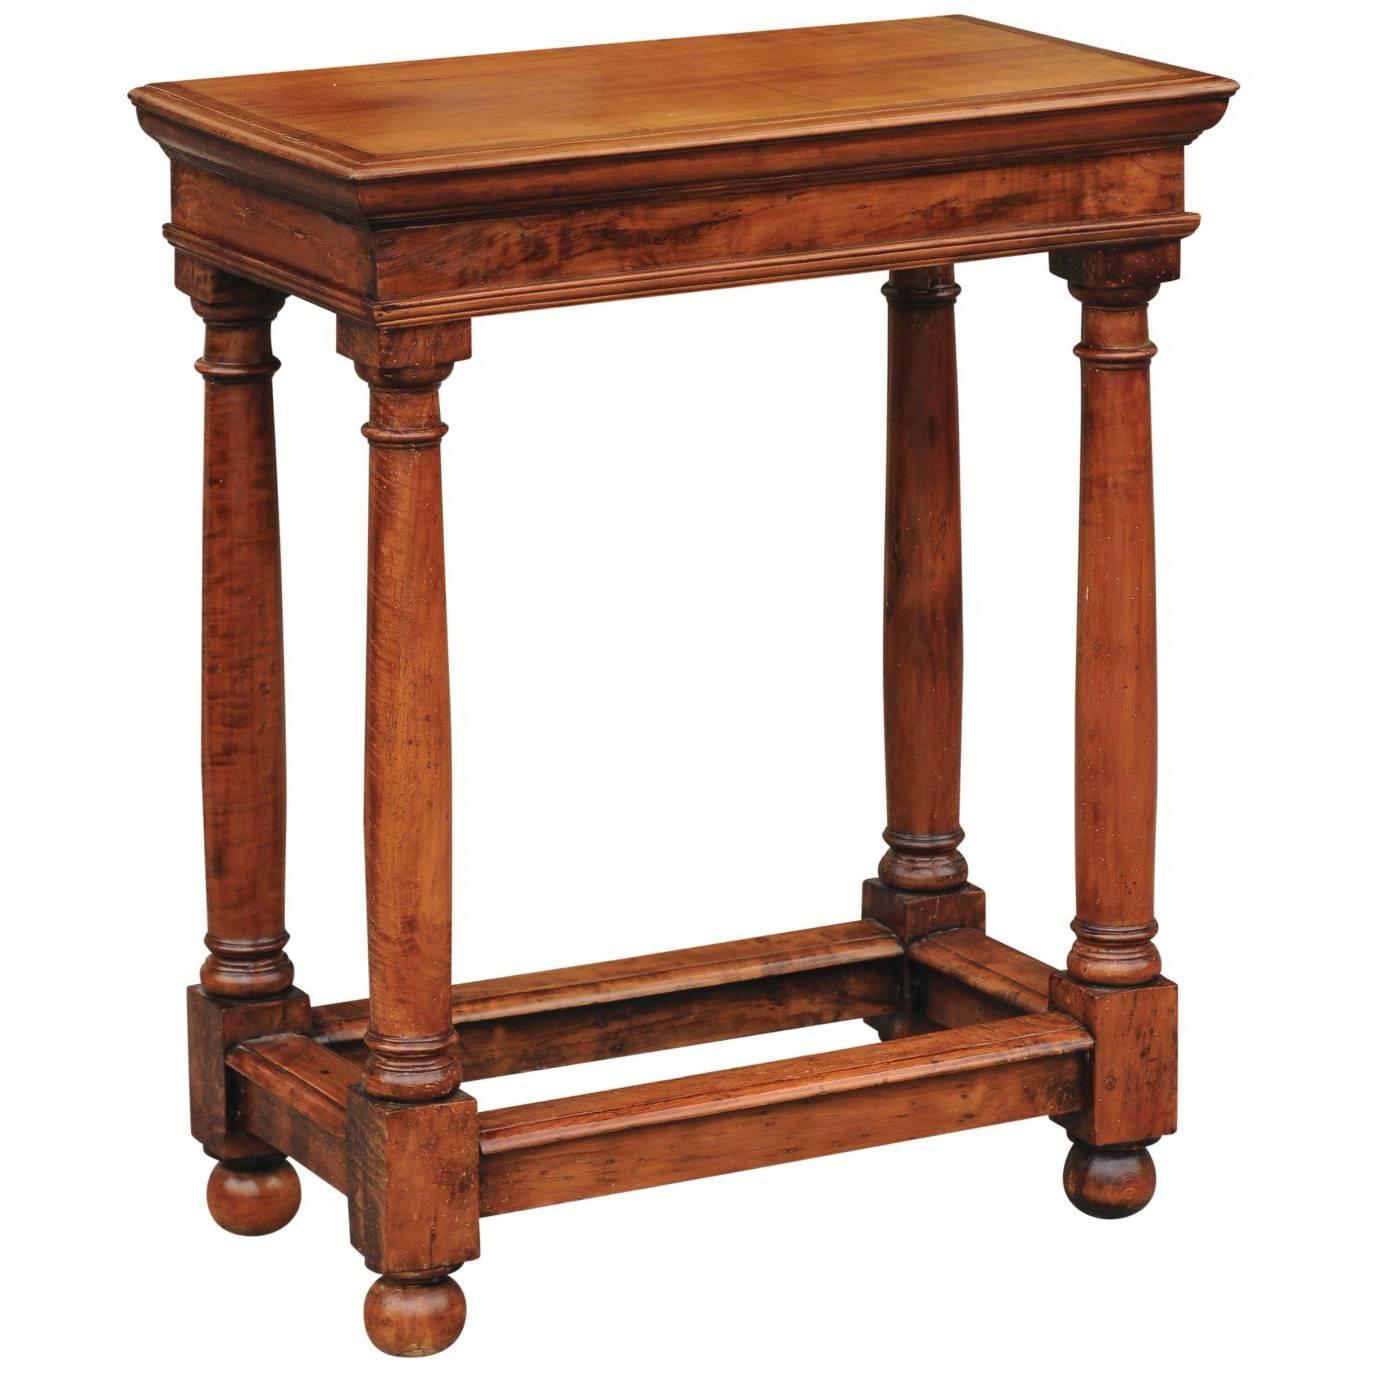 French Empire Style Mid-19th Century Fruitwood Side Table with Doric Column Legs For Sale